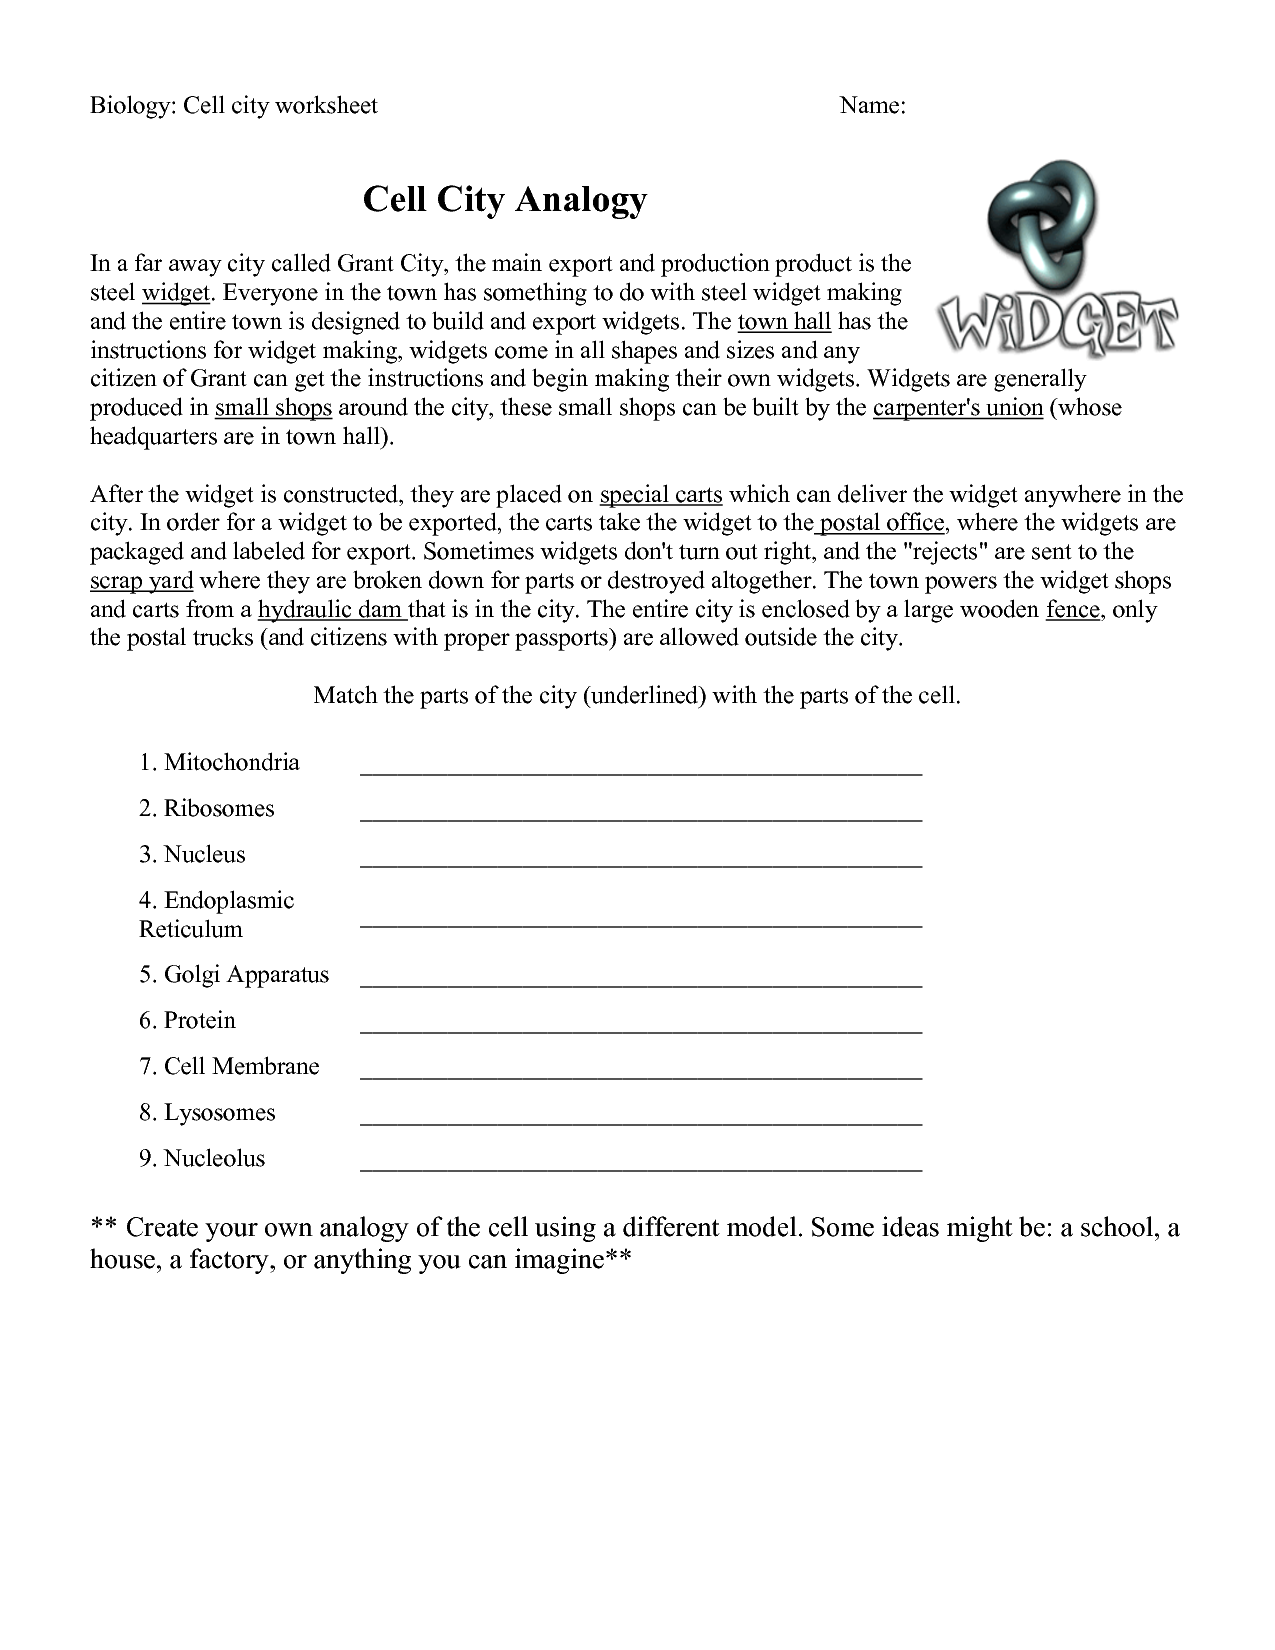 Cell City Analogy Worksheet Answers Image